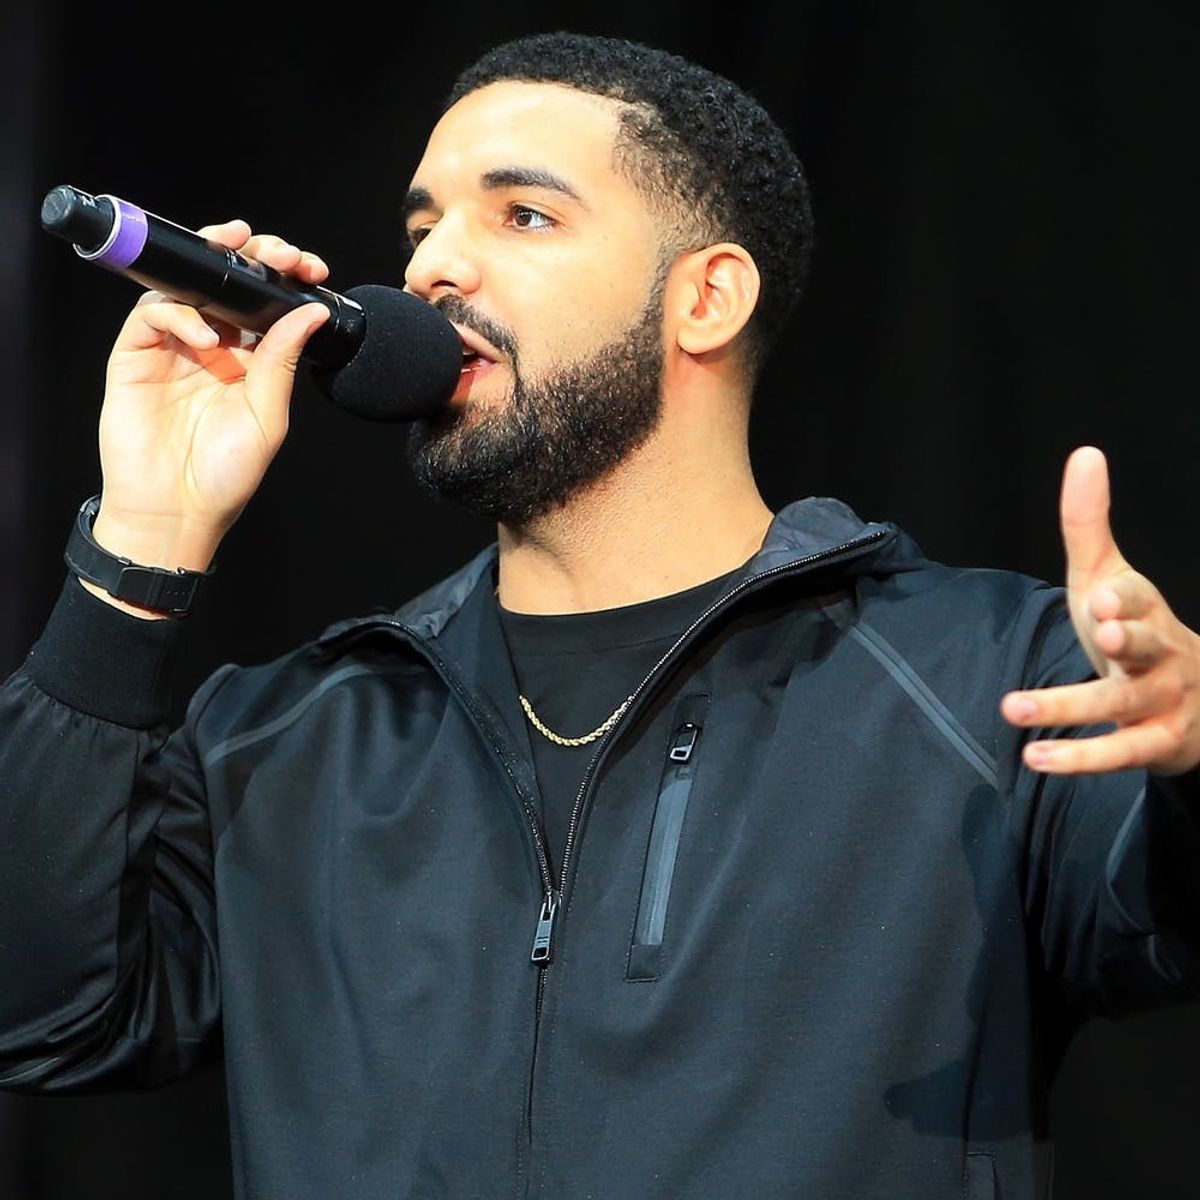 Spotify Just Revealed the Most-Streamed Songs of Summer 2018